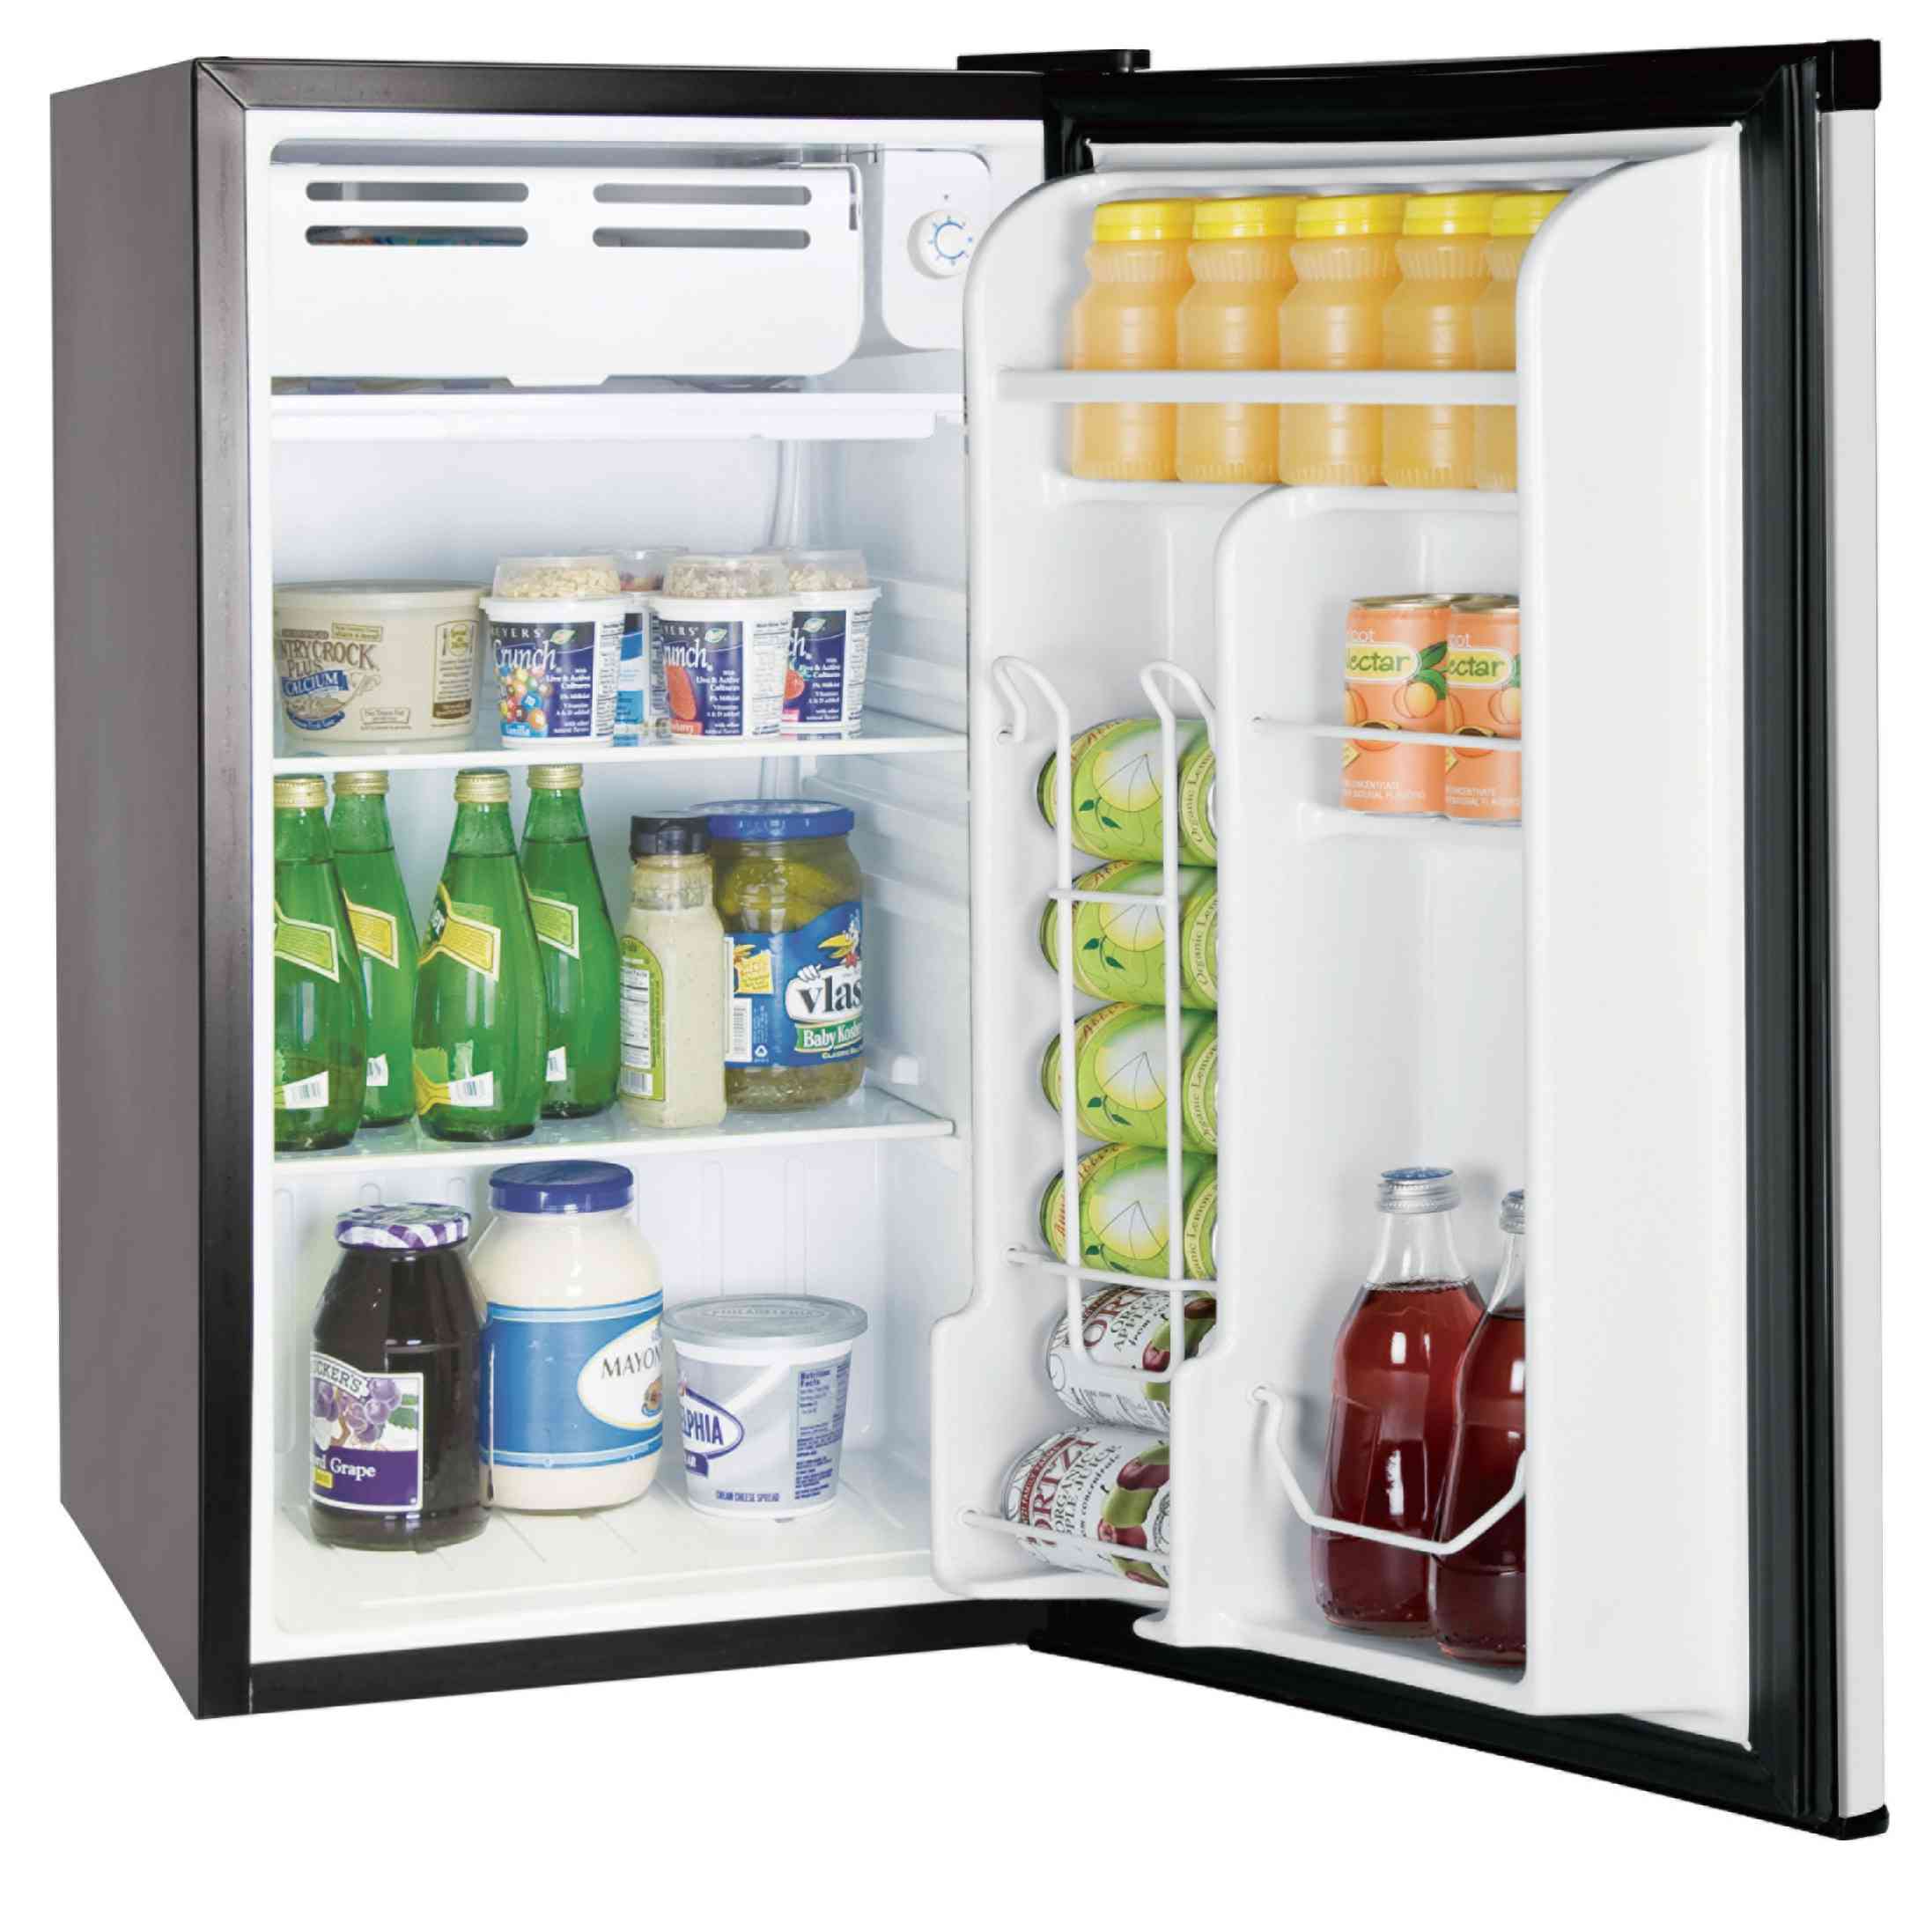 3.2CUFT Compact Refrigerator, Low Price Refrigerator, OEM/ODM with Customization Services